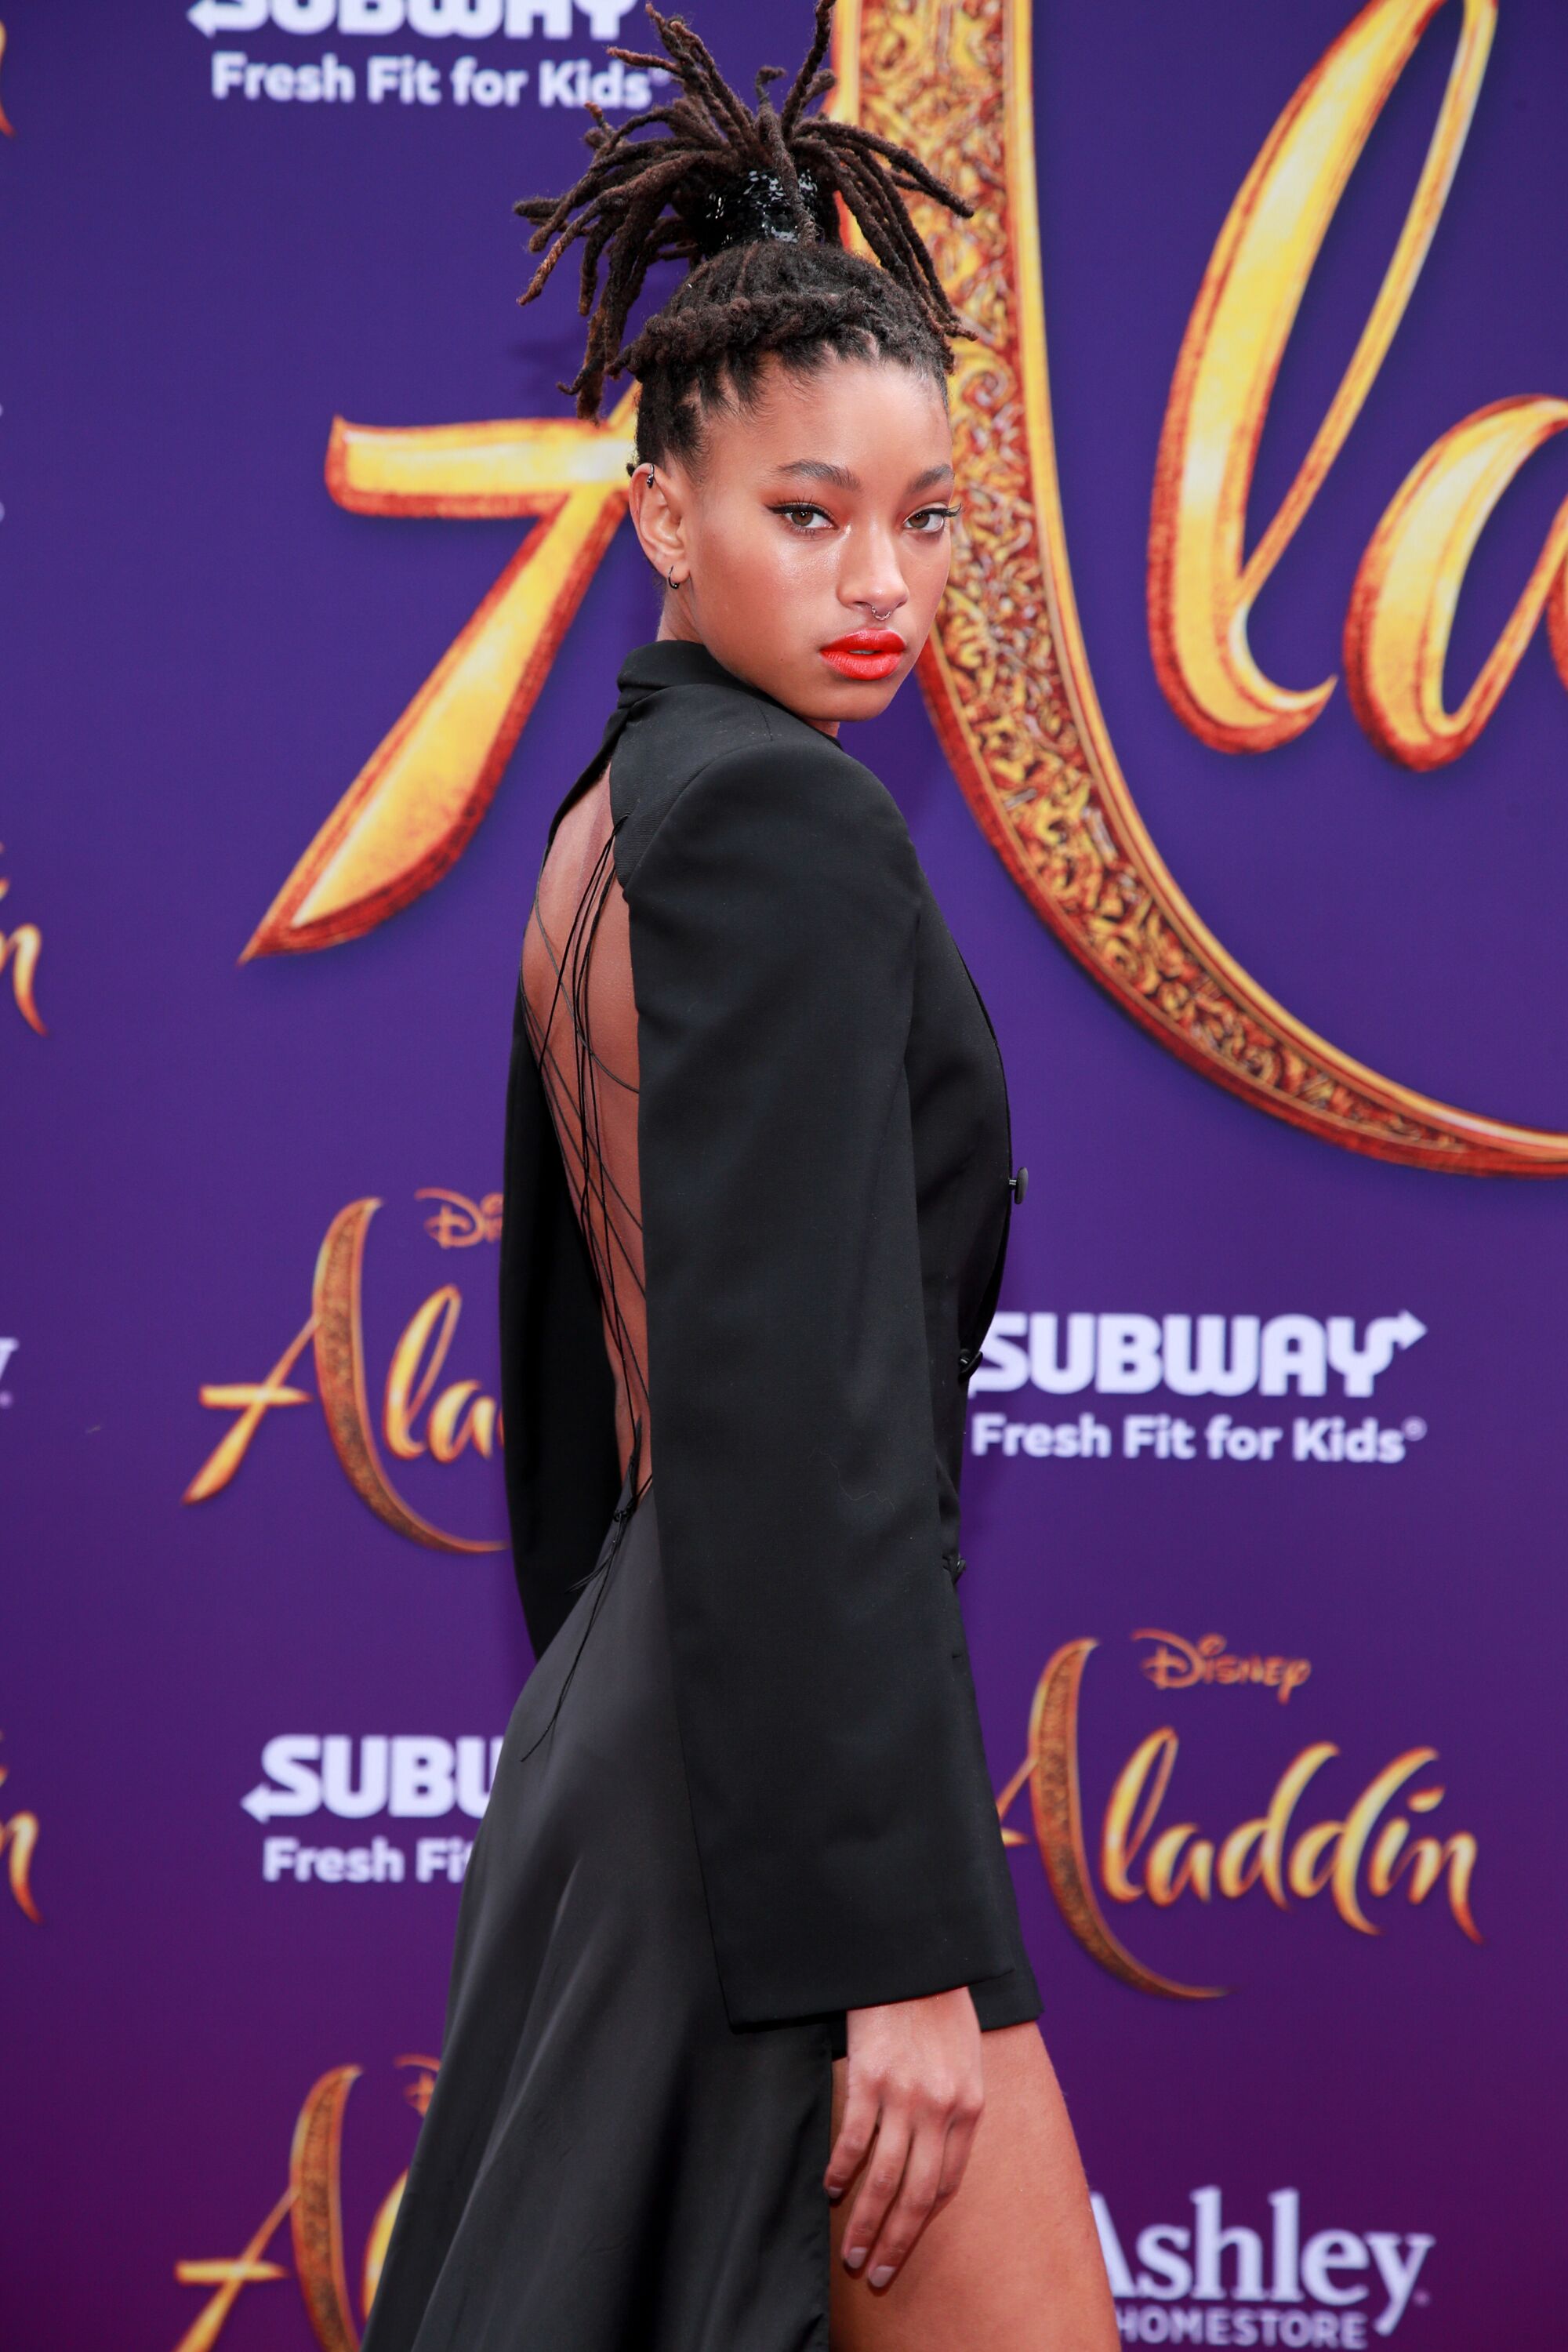 Willow Smith attends the "Aladdin" live-action movie premiere | Source: Getty Images/GlobalImagesUkraine